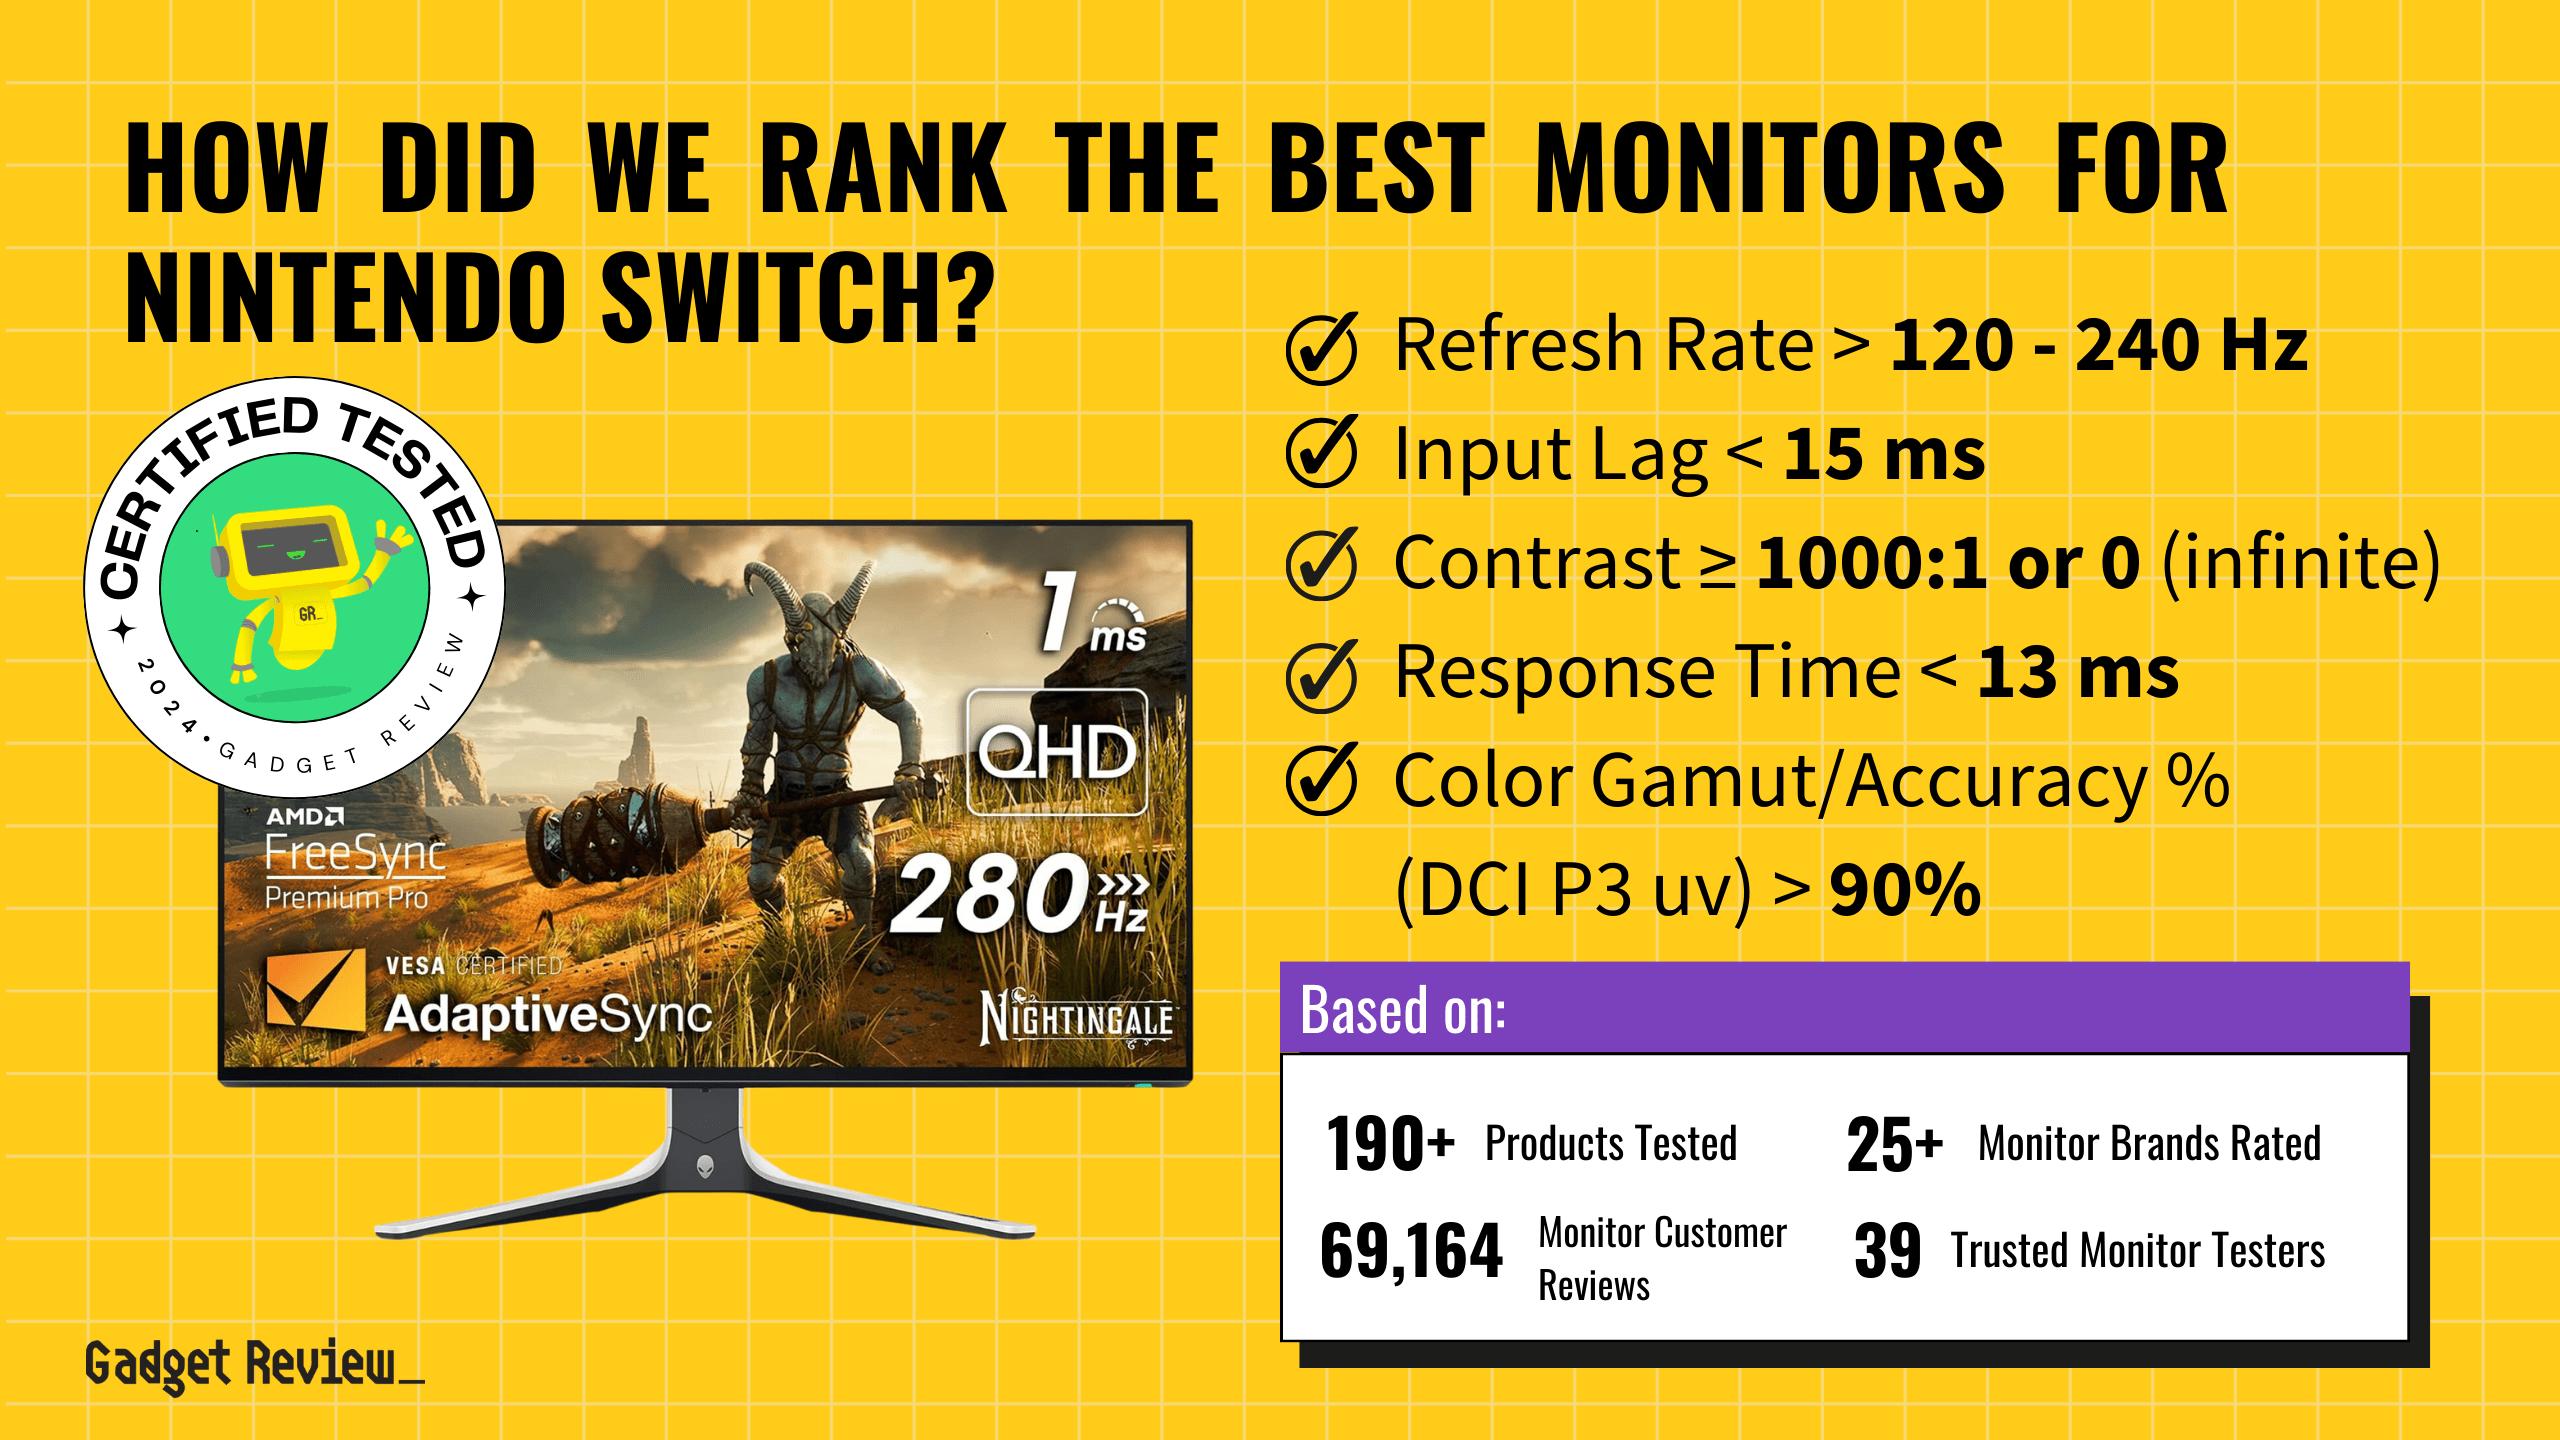 5 Top Monitors For Nintendo Switch Ranked